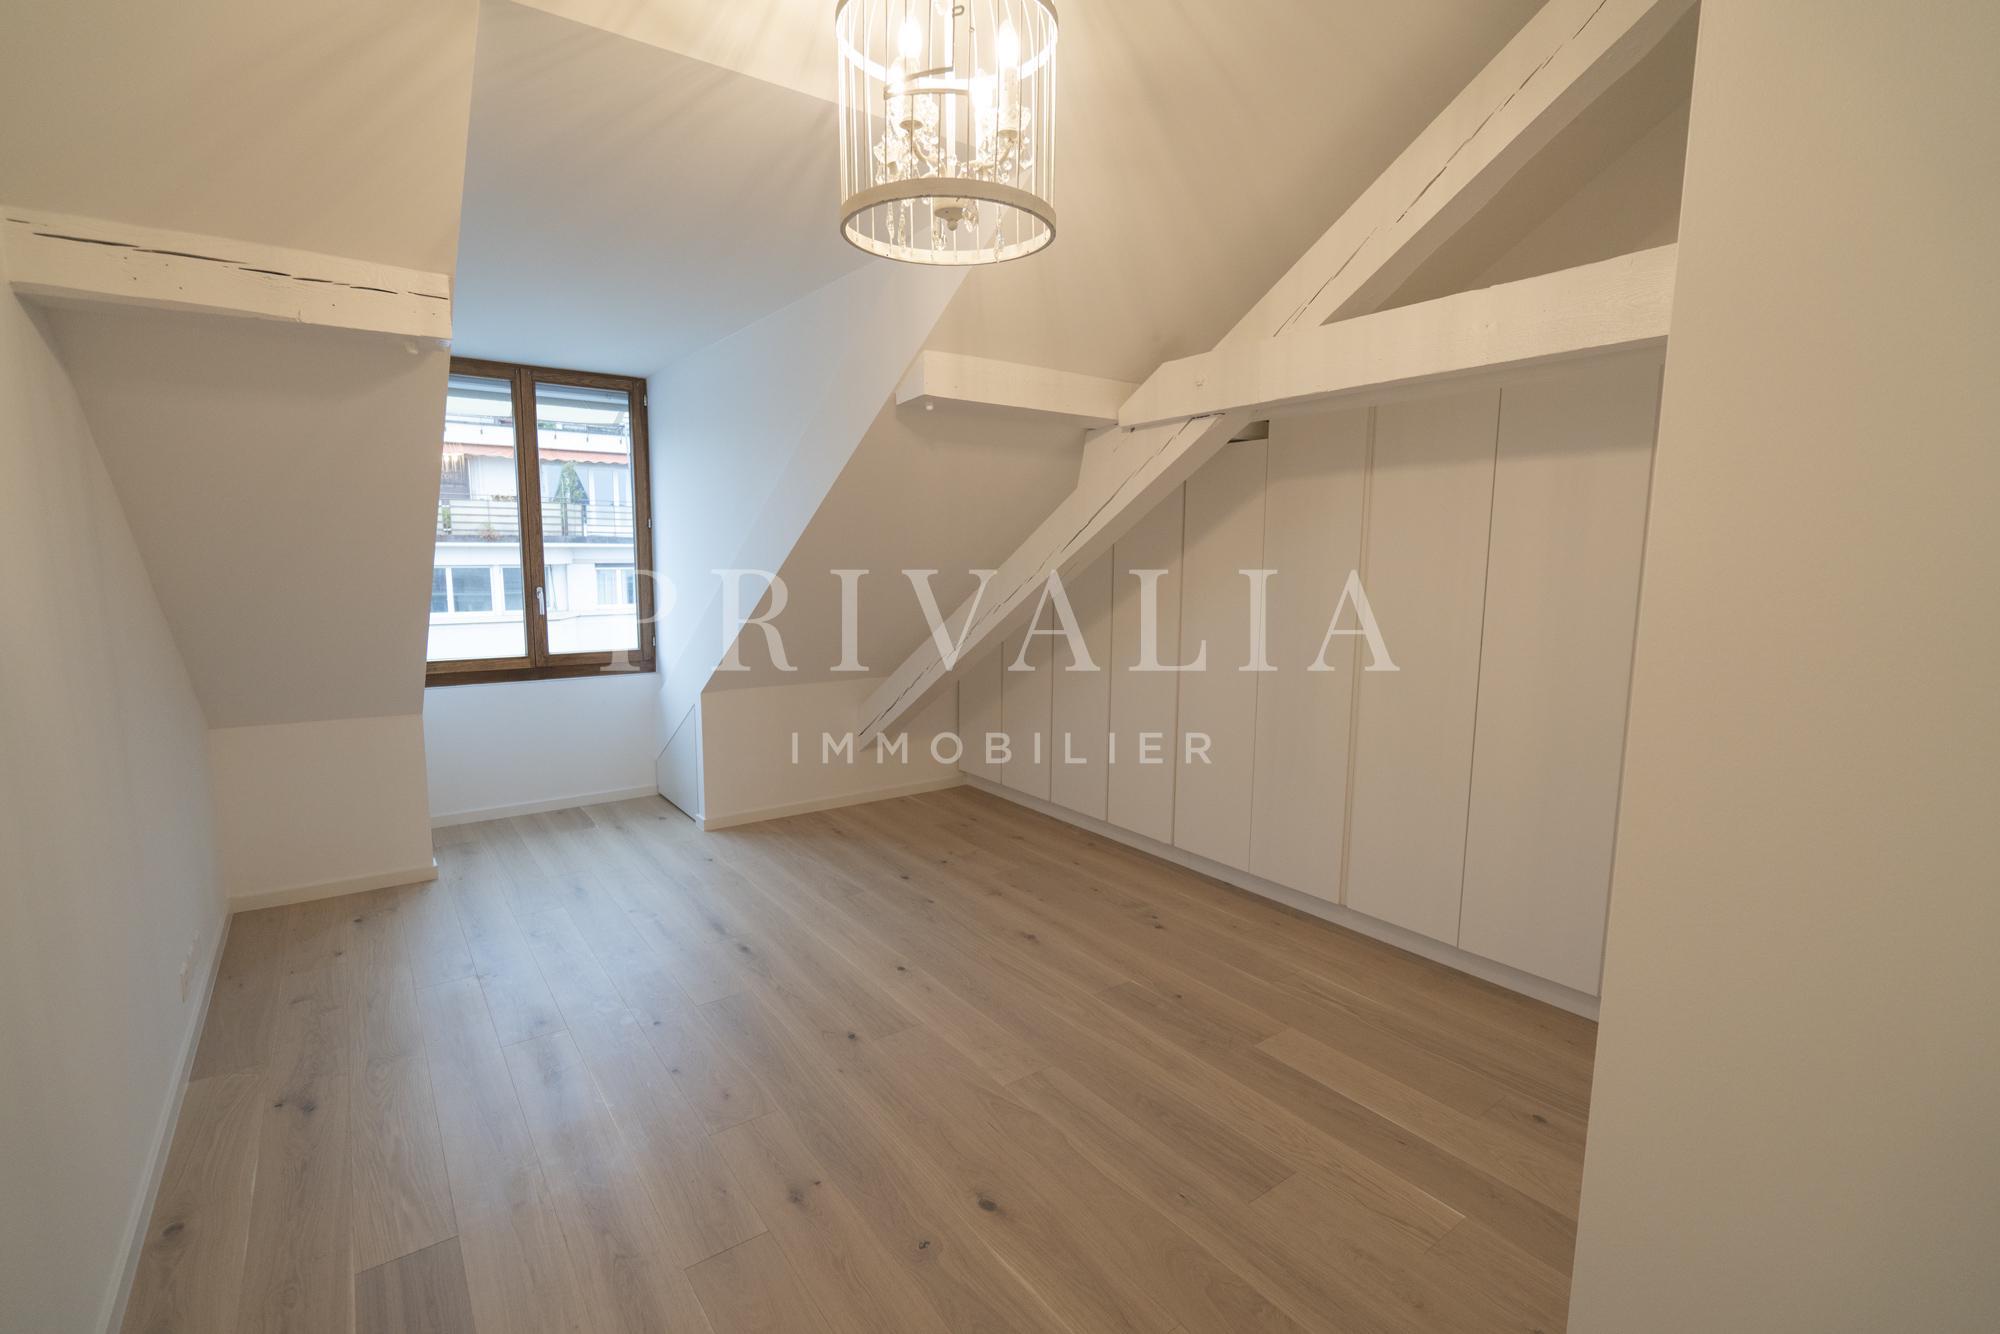 PrivaliaBeautiful apartment completely renovated